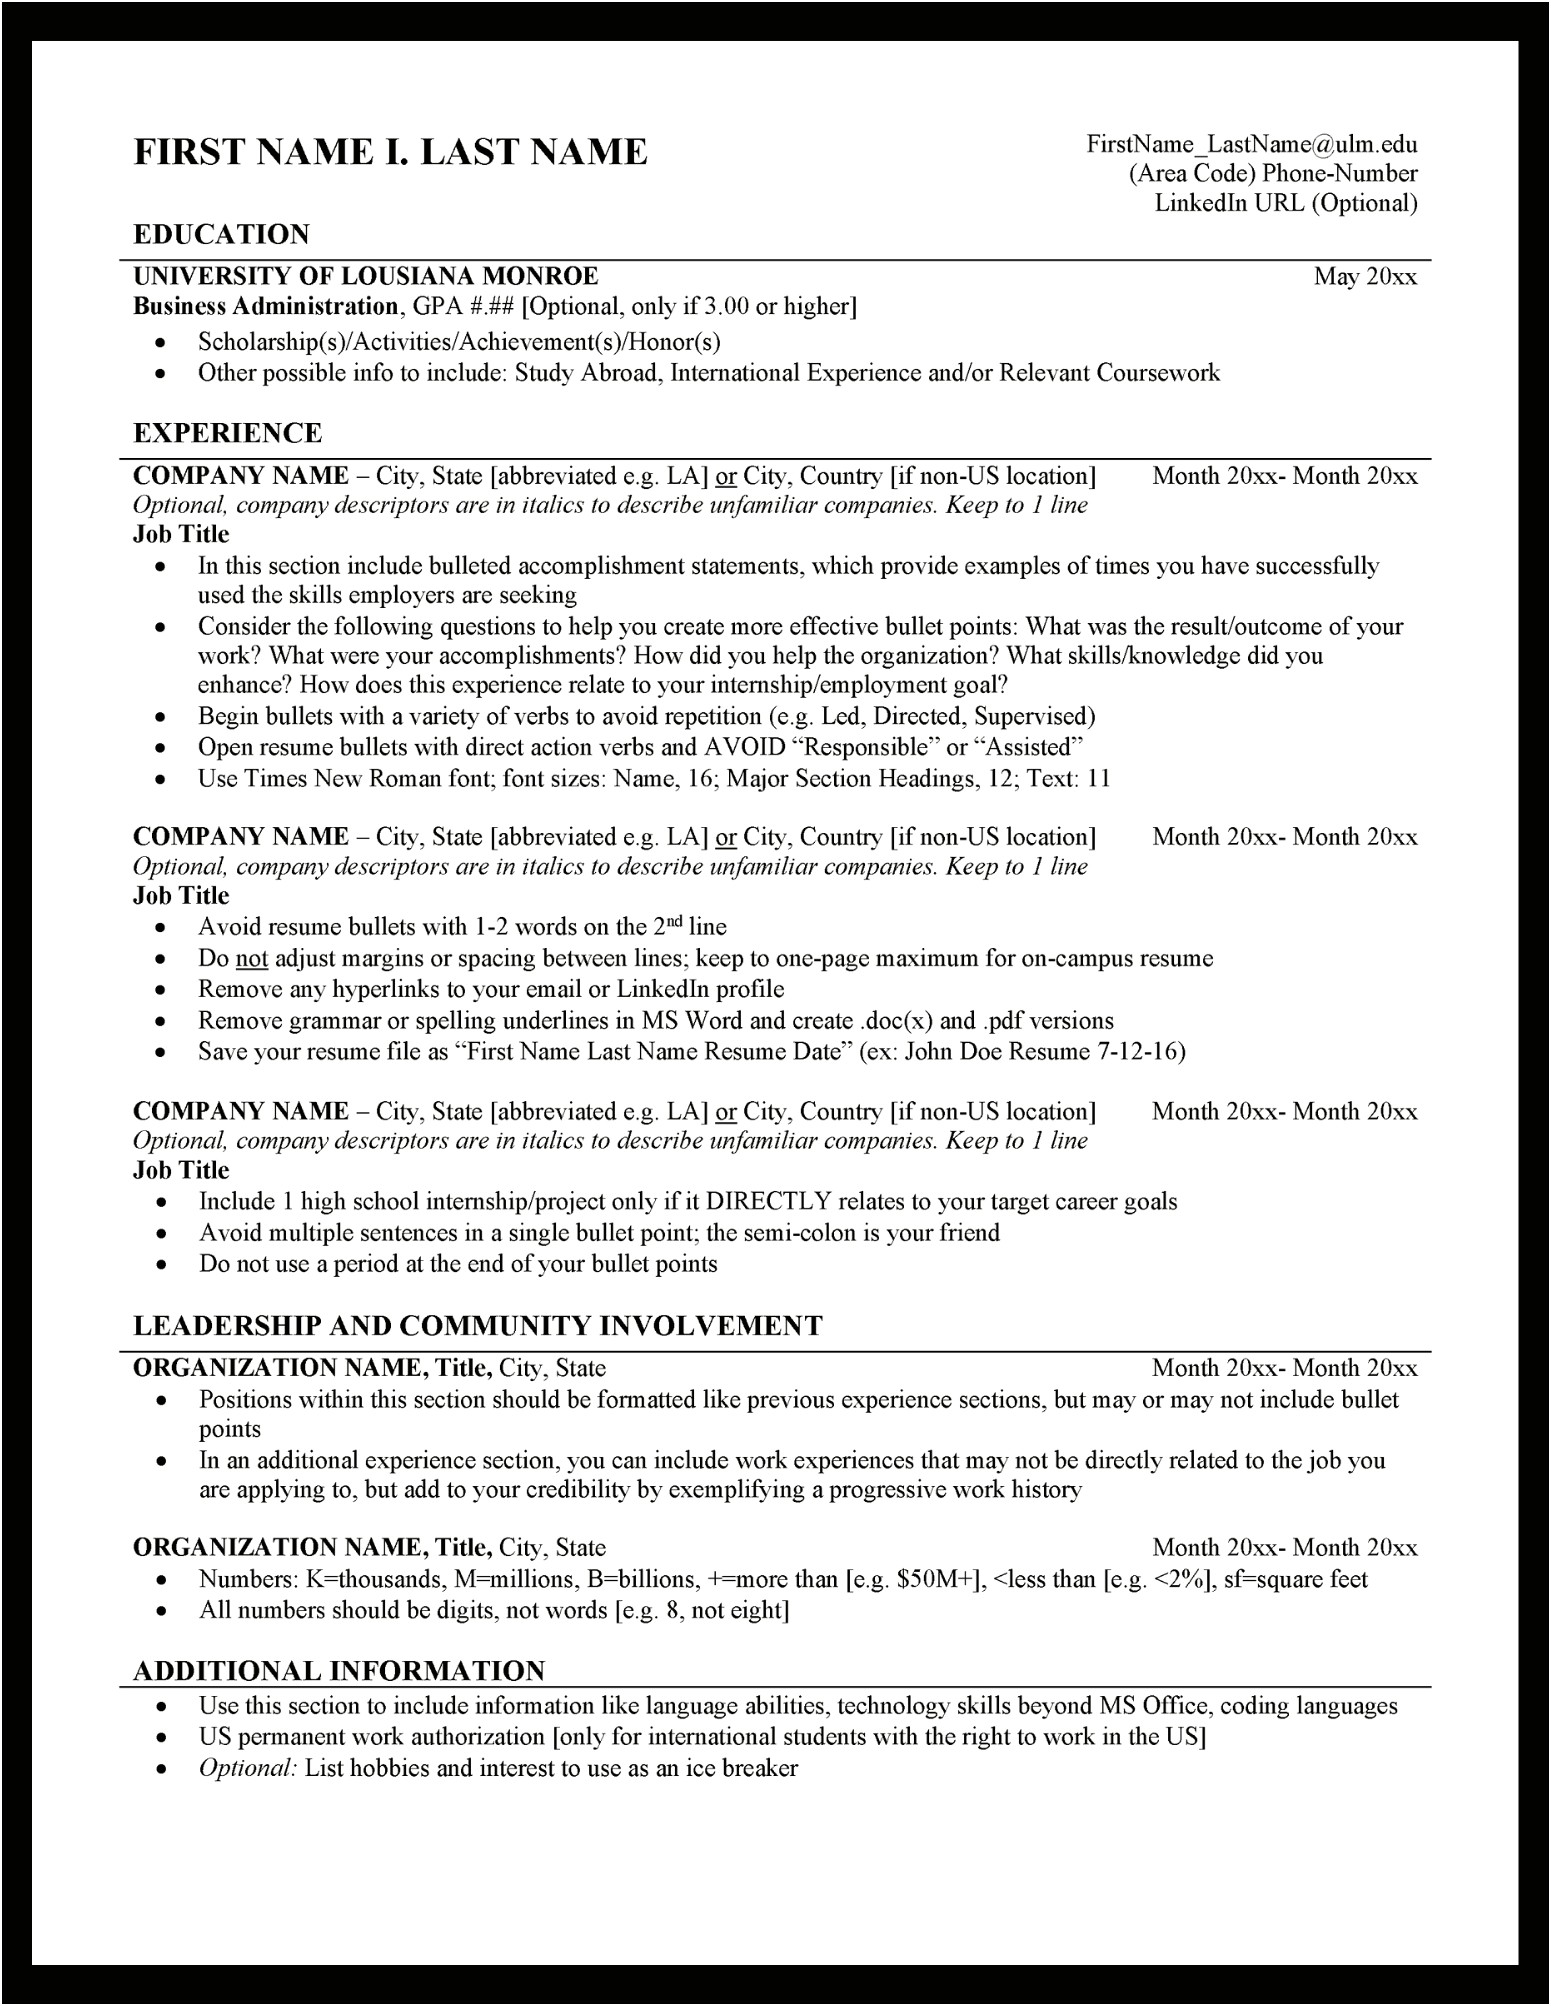 Tips For Writing A Resume For Grad School